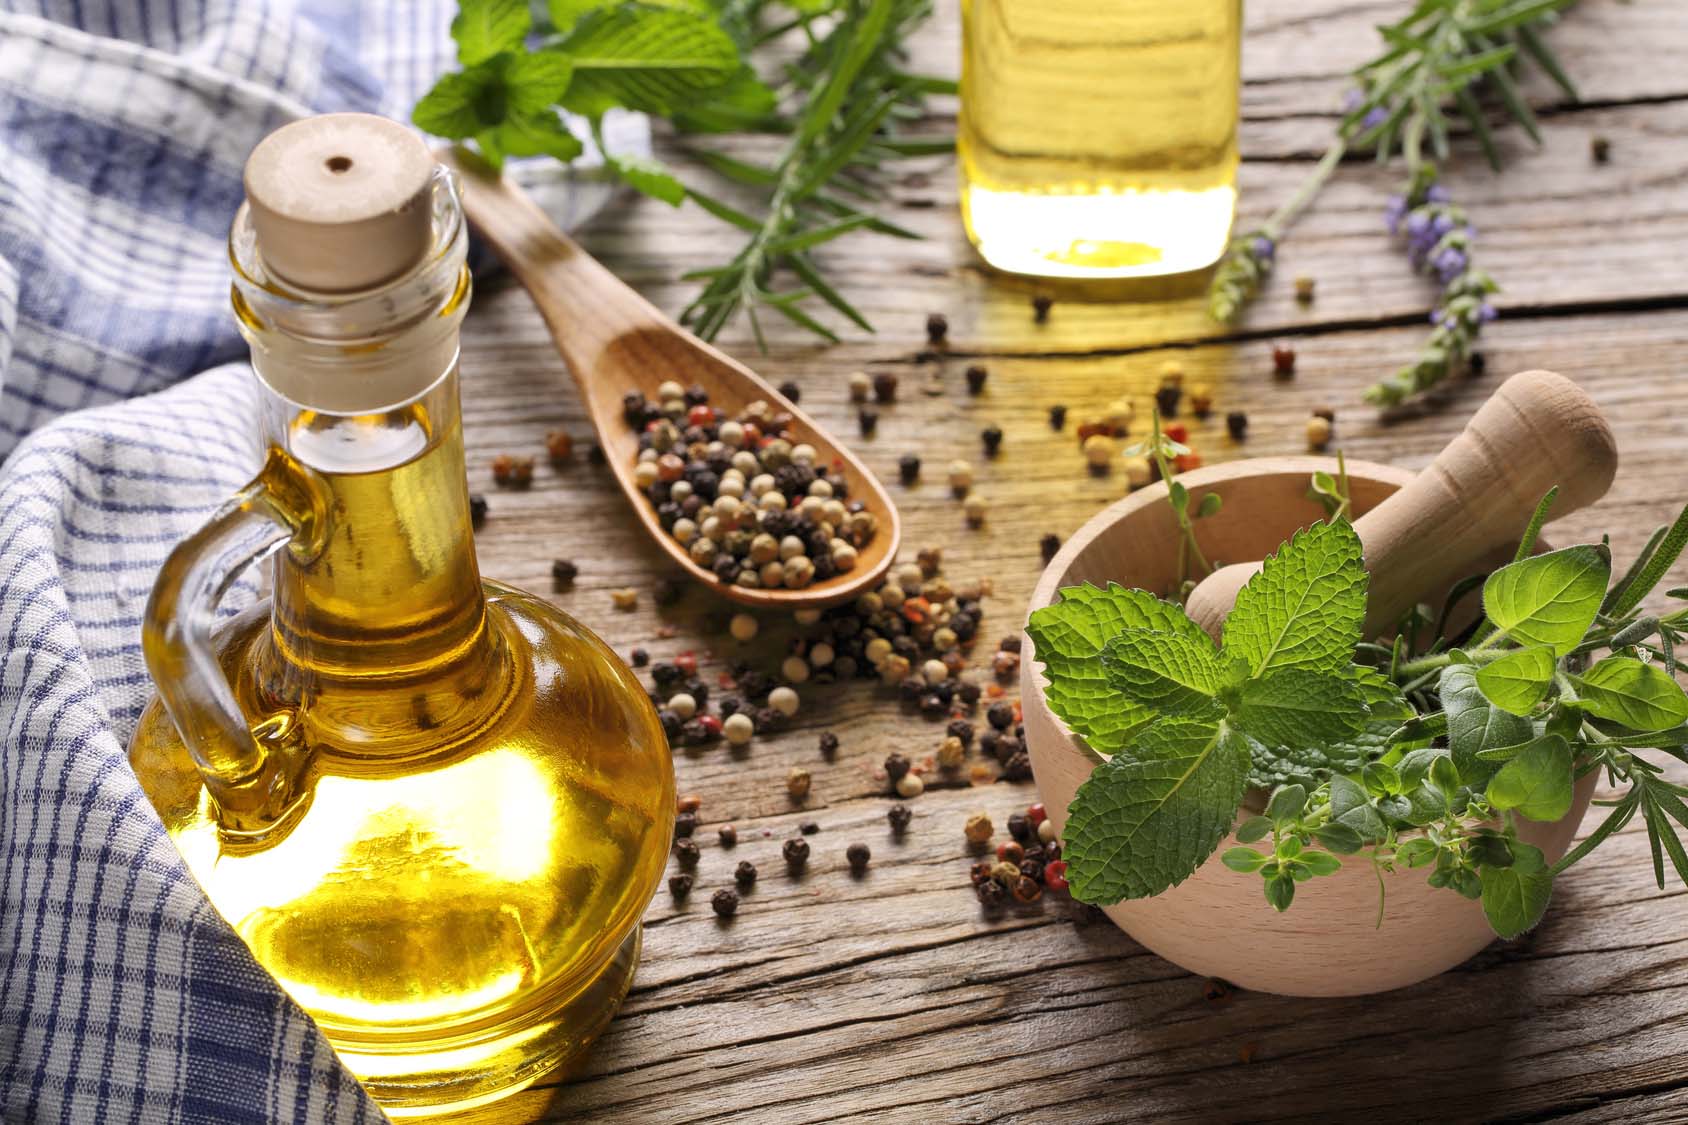 Extra virgin olive oil in glass jar next to peppercorns on wooden spoon, and fresh mint and herbs in a wooden mortar. Gourmet Spice Company, Wholesale Food Distributor.